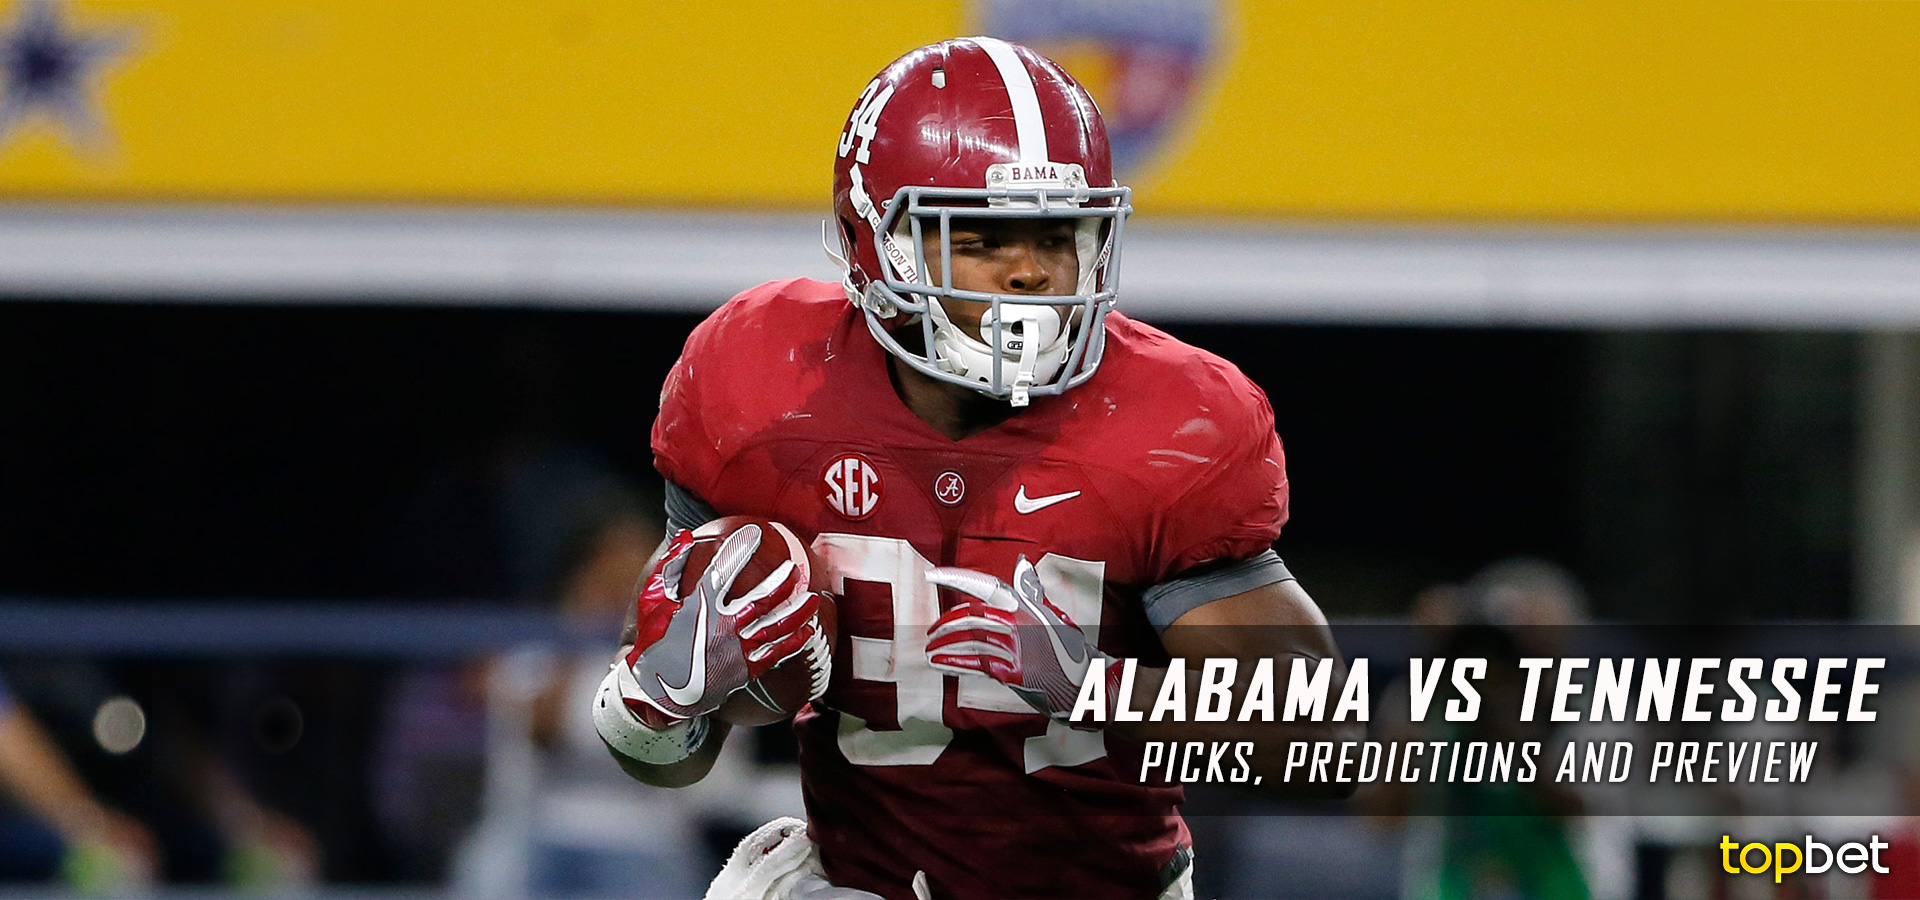 Alabama vs Tennessee Football Predictions, Picks and Preview